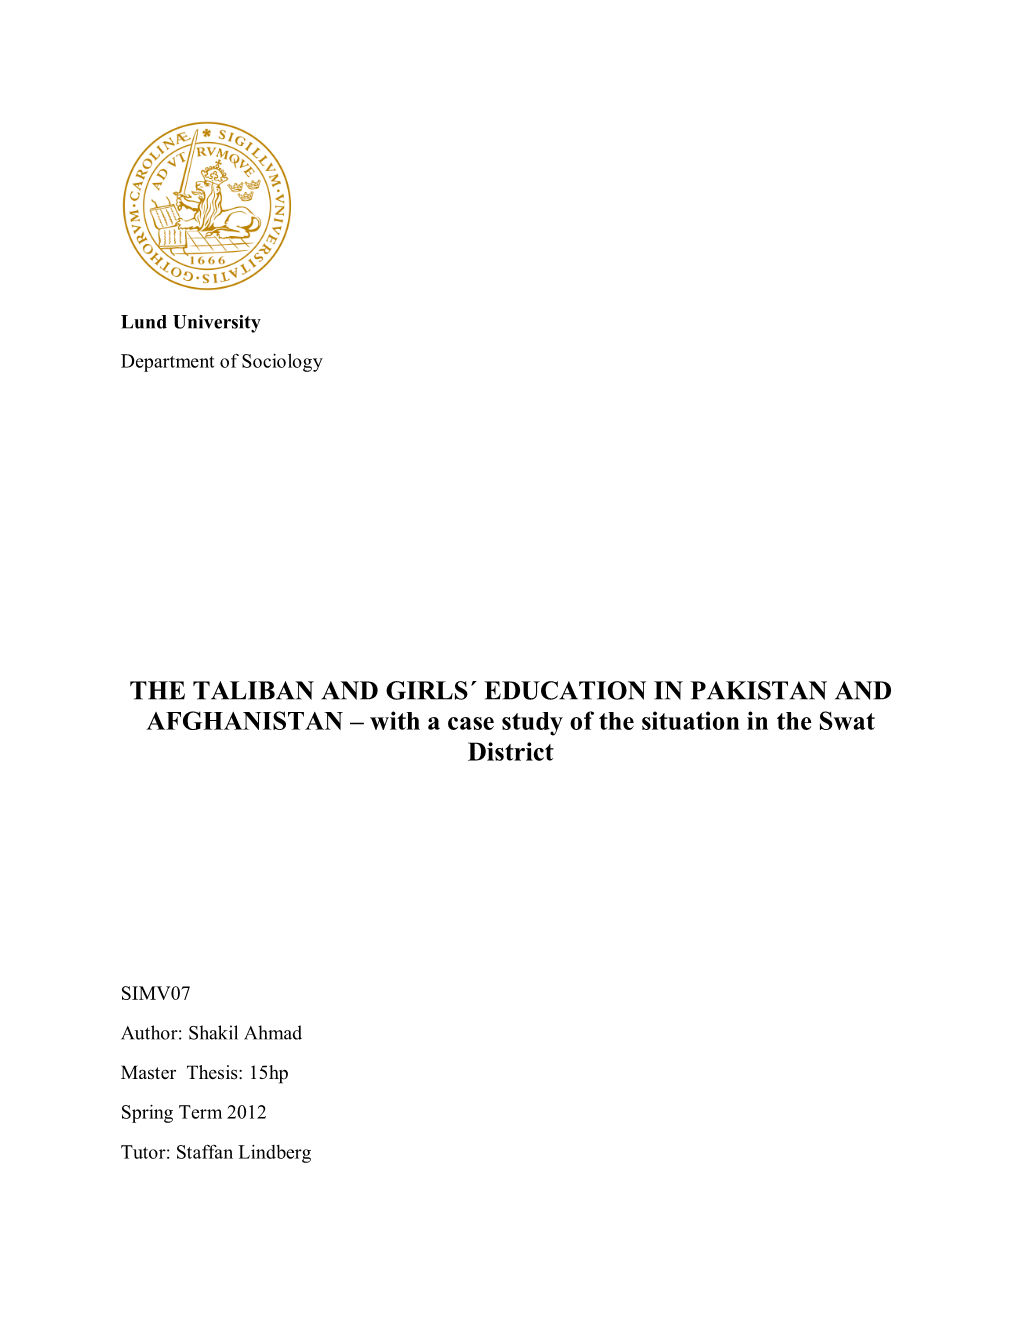 THE TALIBAN and GIRLS´ EDUCATION in PAKISTAN and AFGHANISTAN – with a Case Study of the Situation in the Swat District